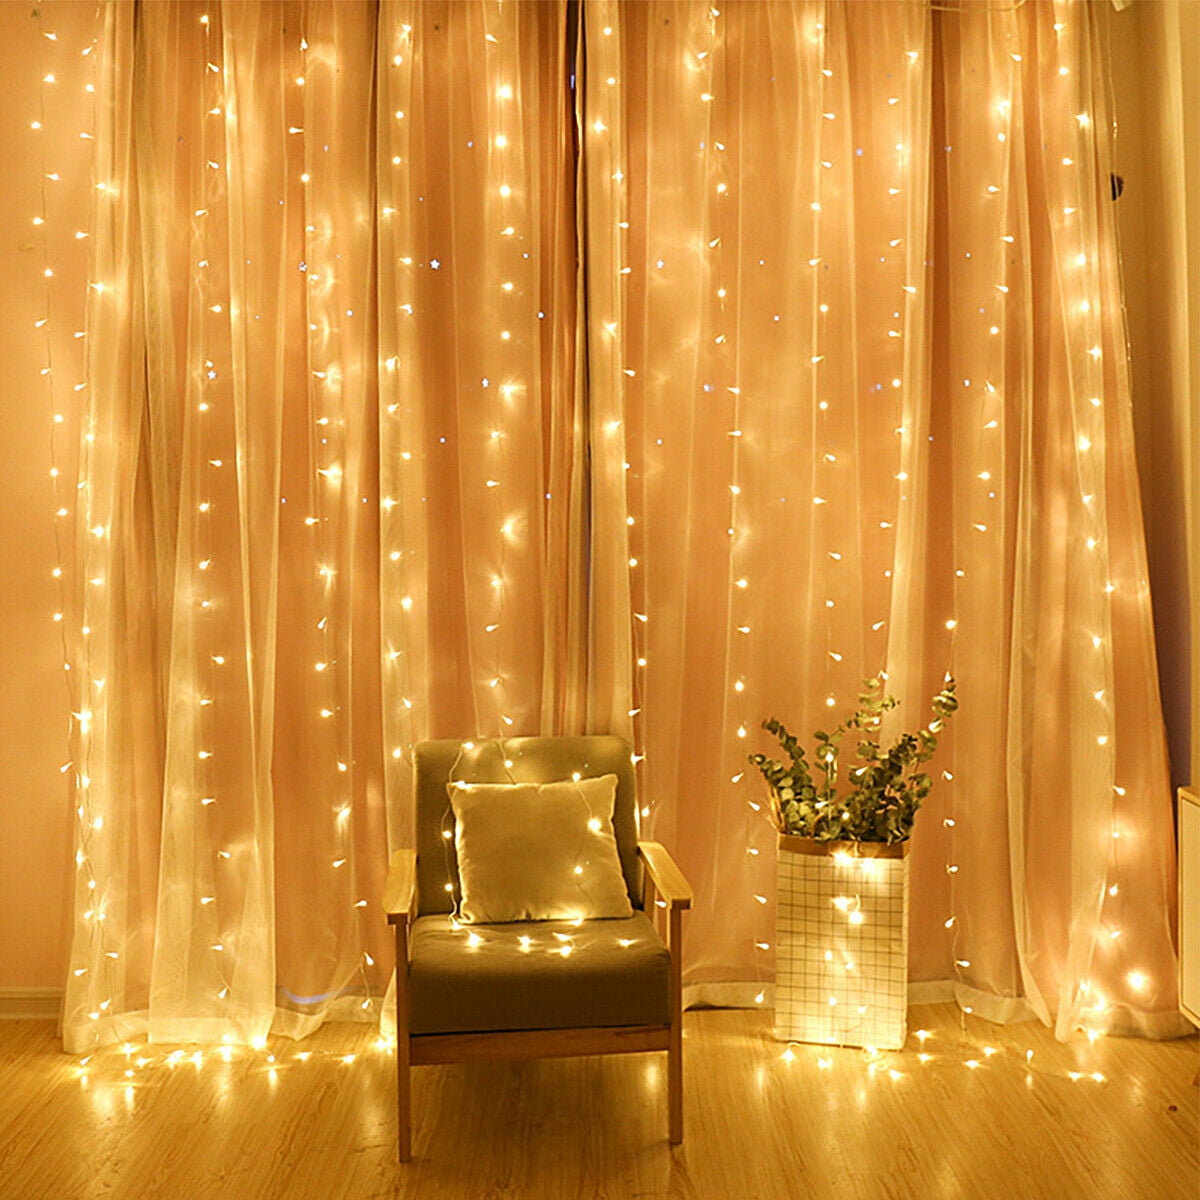 20 LED Curtain Fairy Hanging String Lights Christmas Wedding Party Home Decor 2M 